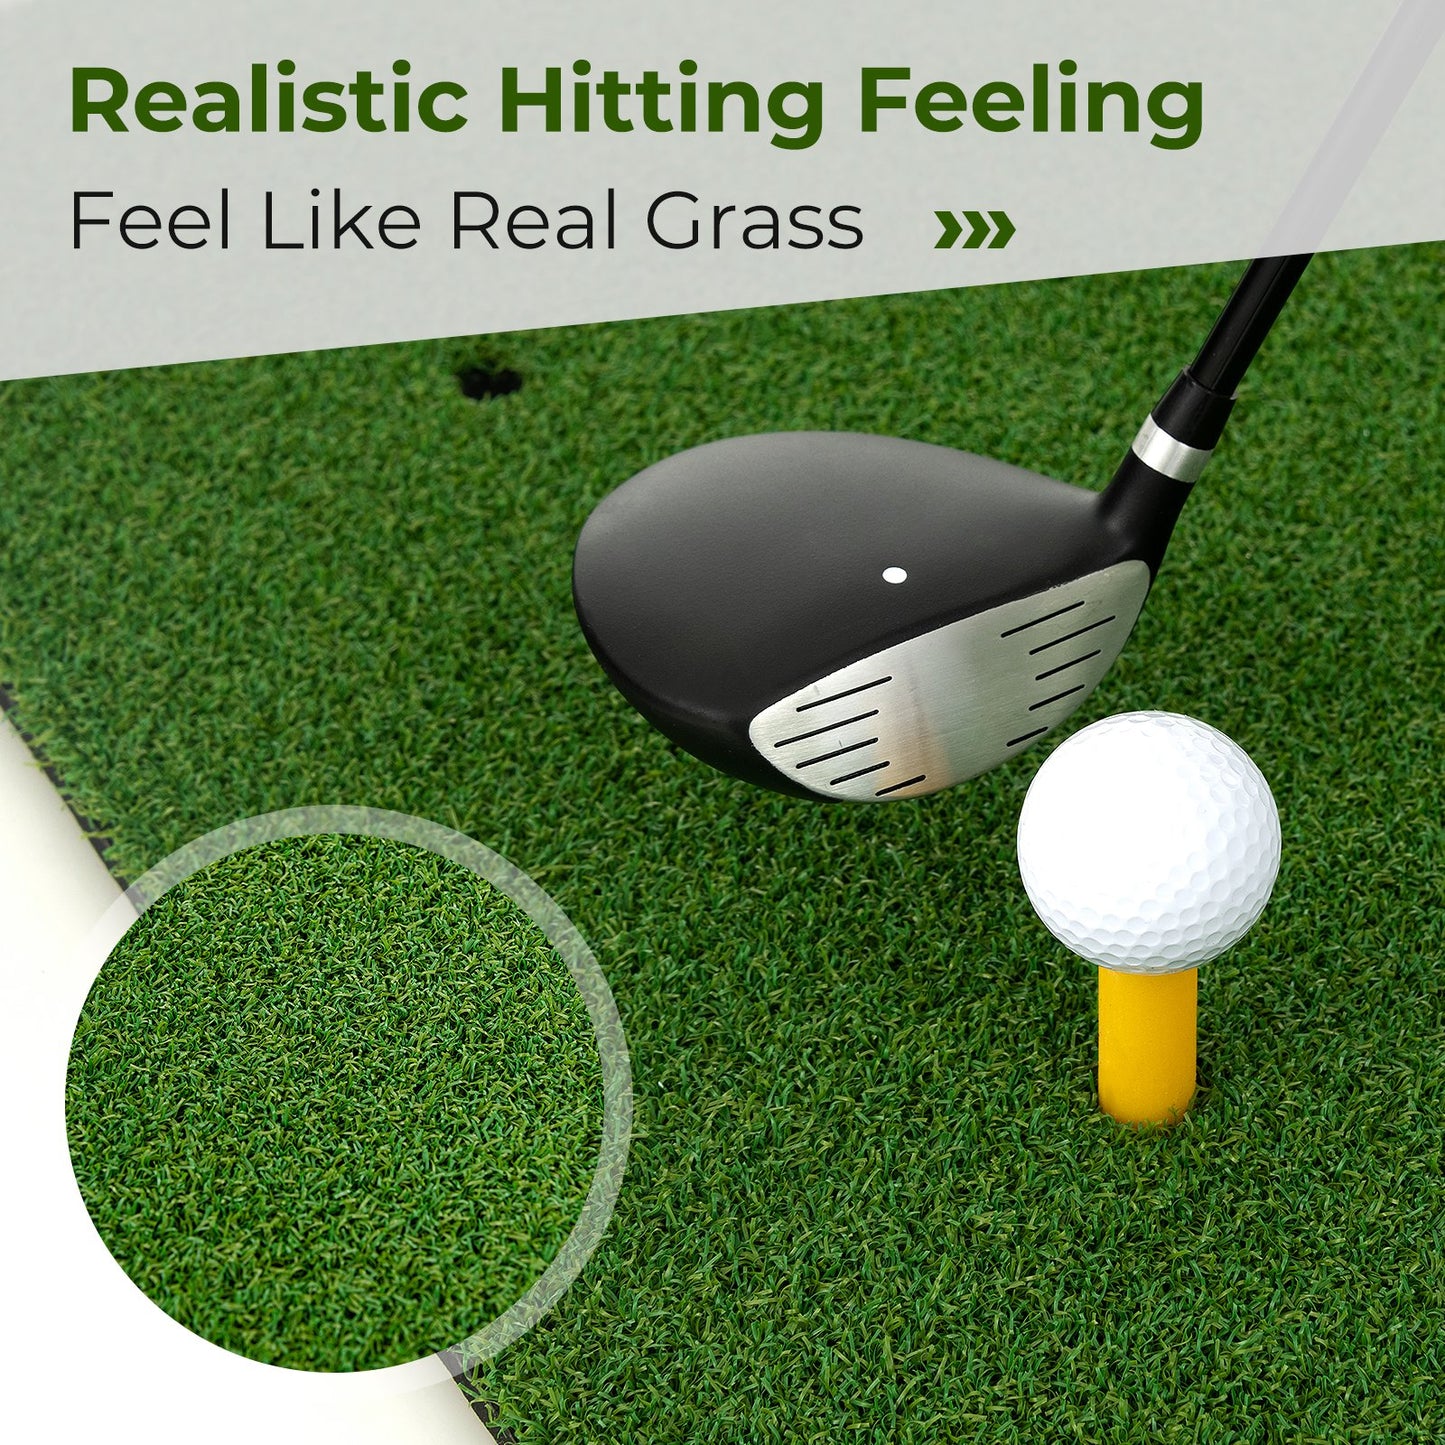 Artificial Turf Mat for Indoor and Outdoor Golf Practice Includes 2 Rubber Tees and 2 Alignment Sticks-25mm, Green